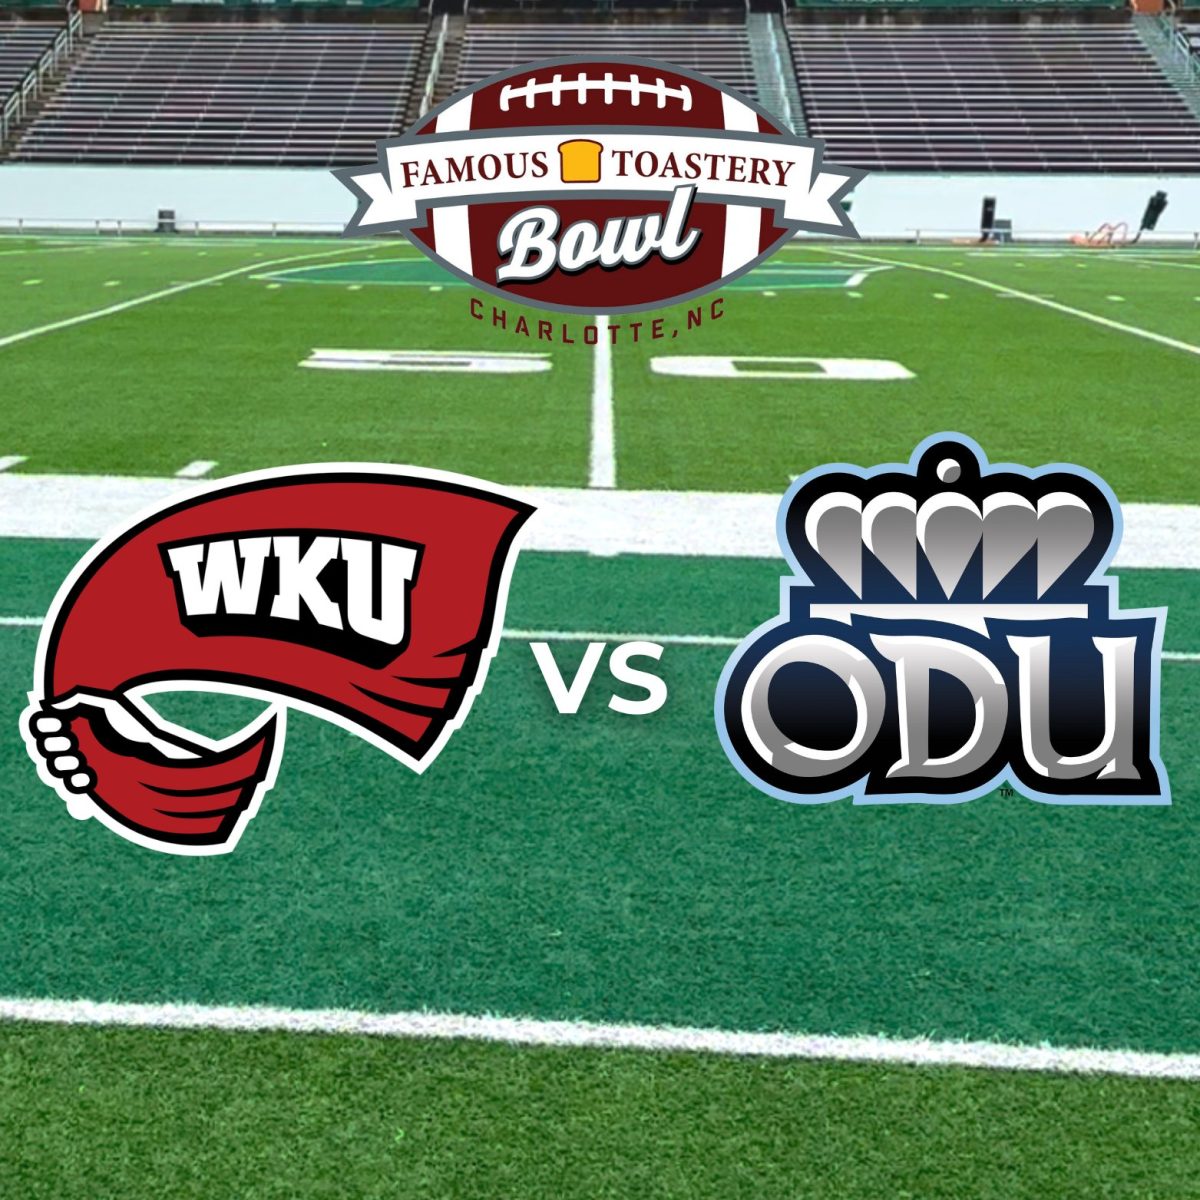 Old+Dominion+vs+Western+Kentucky+face+off+in+Famous+Toastery+Bowl+